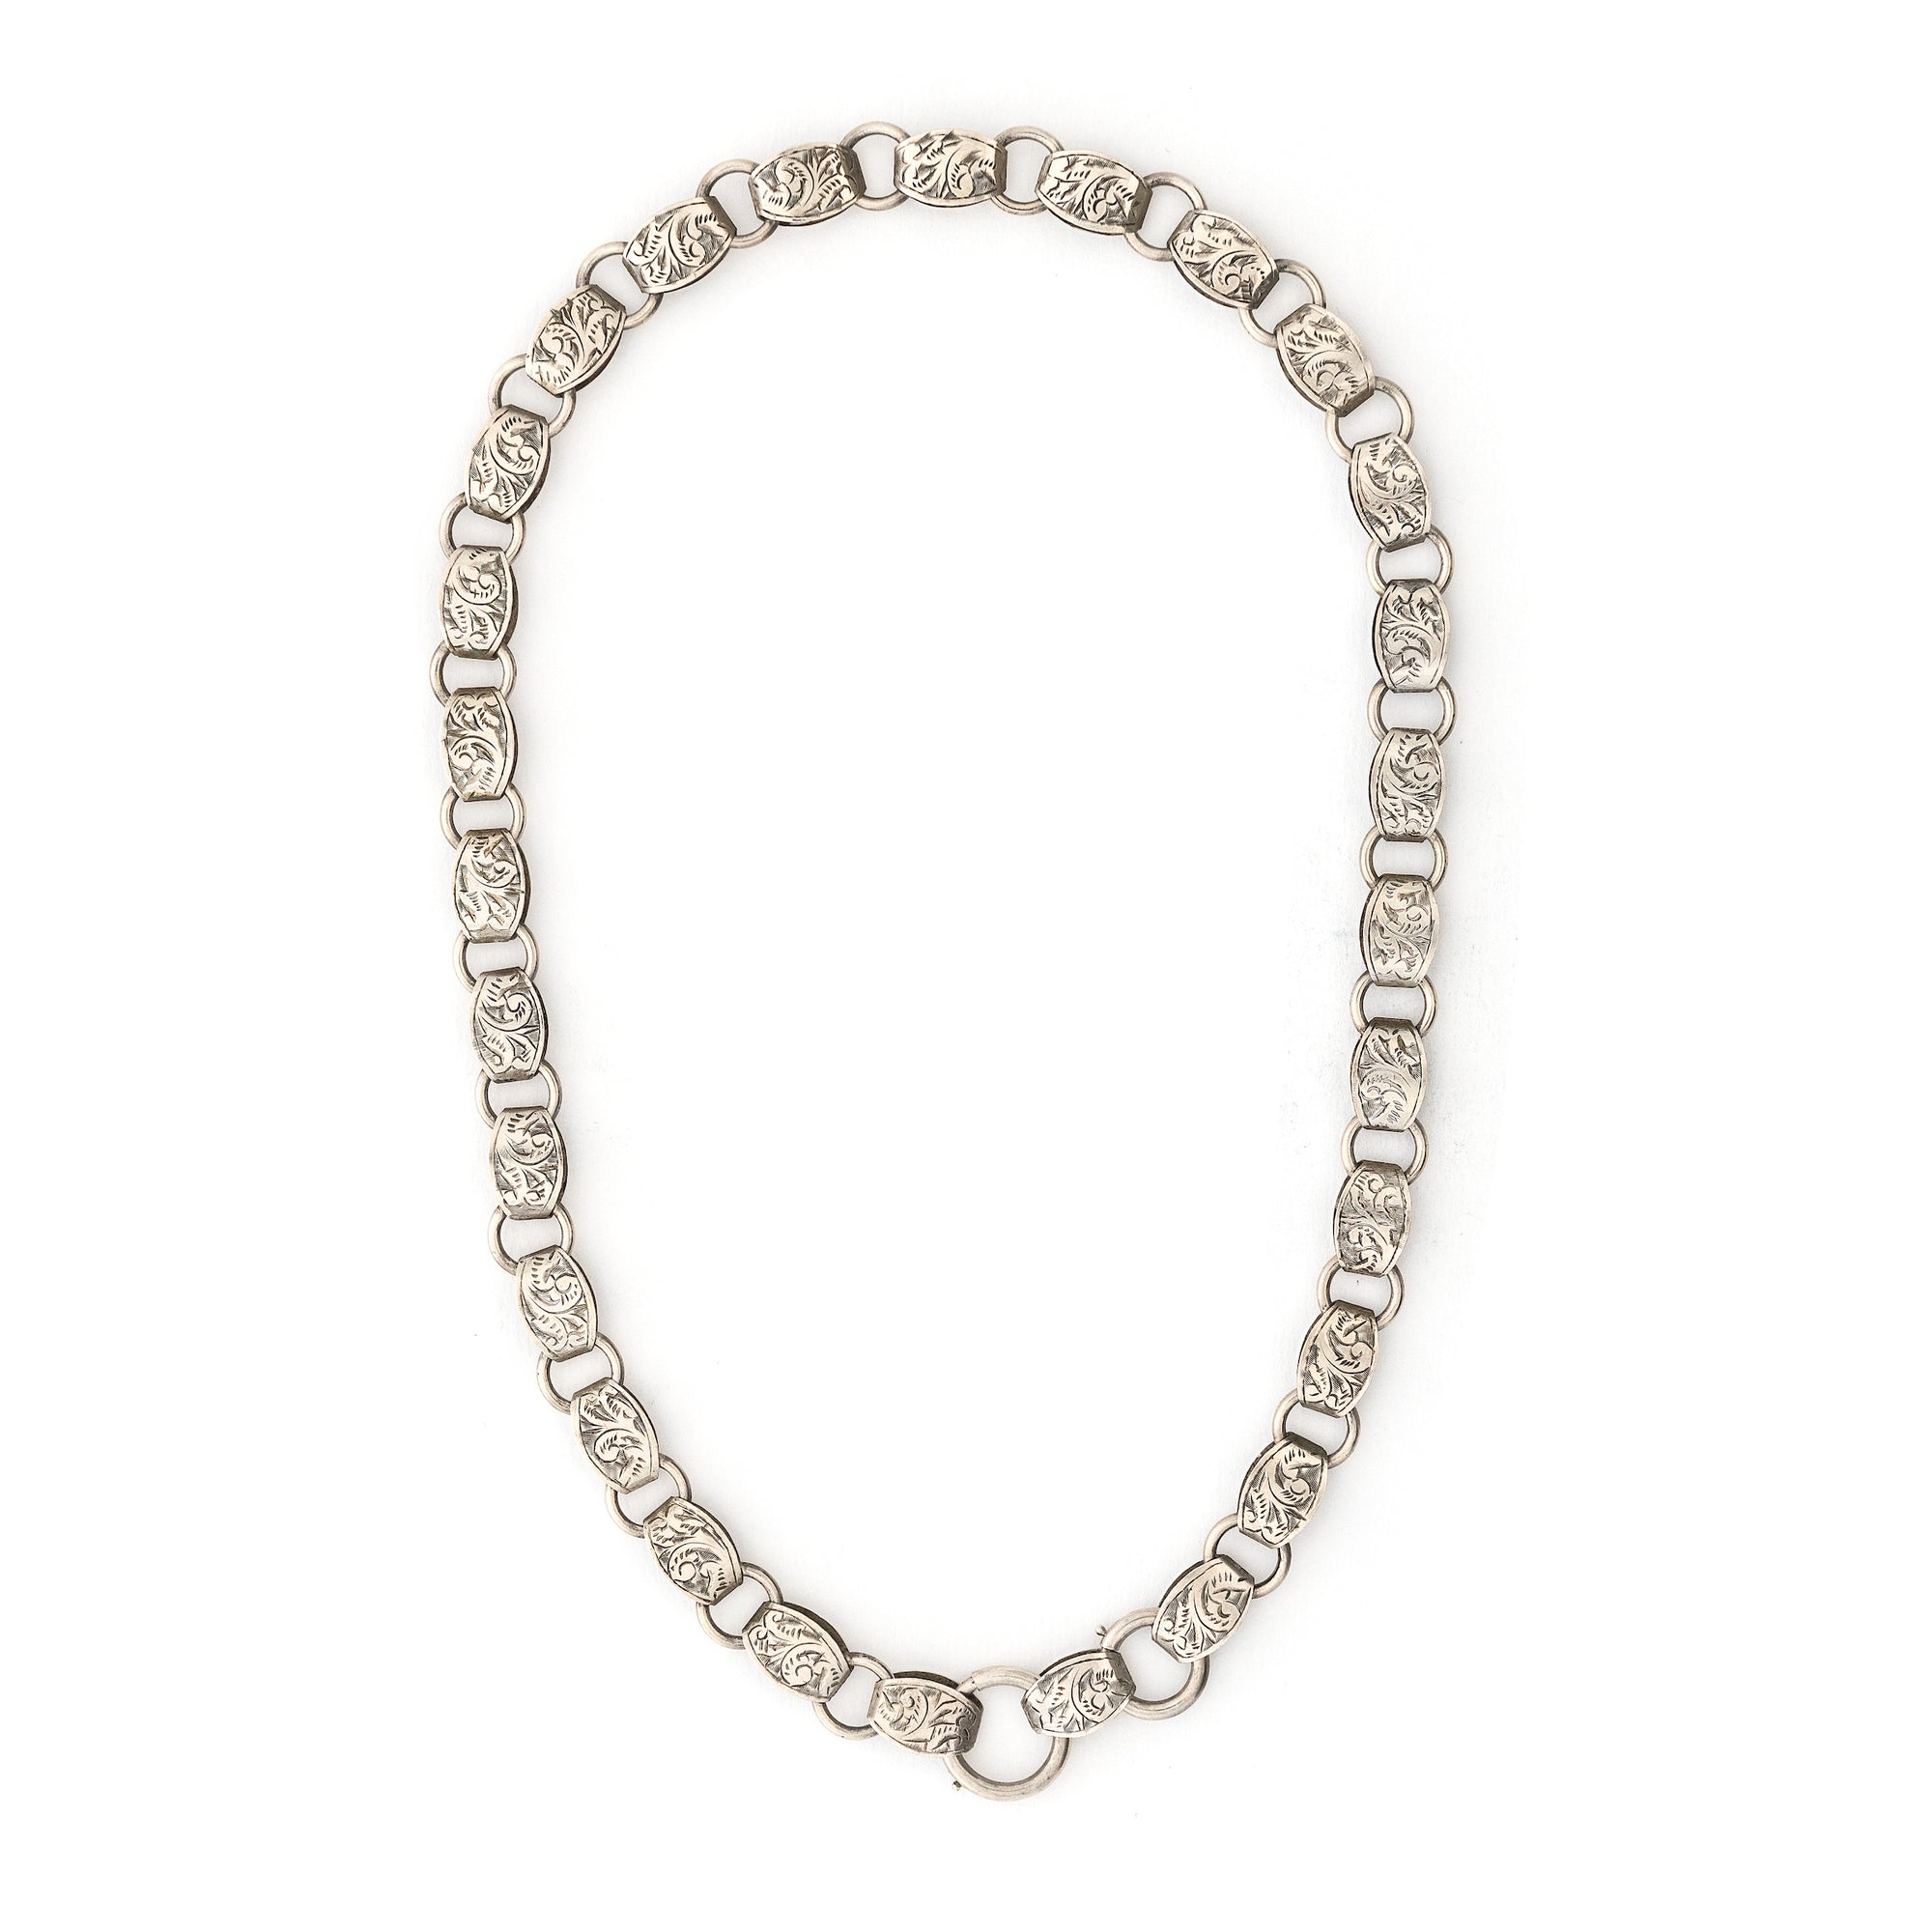 This statement making sterling silver antique book chain features finely engraved oval links, a treasure from the Victorian era. Wear this piece alone, with charms or a locket, or layered with other chains for a bold statement. Close up view